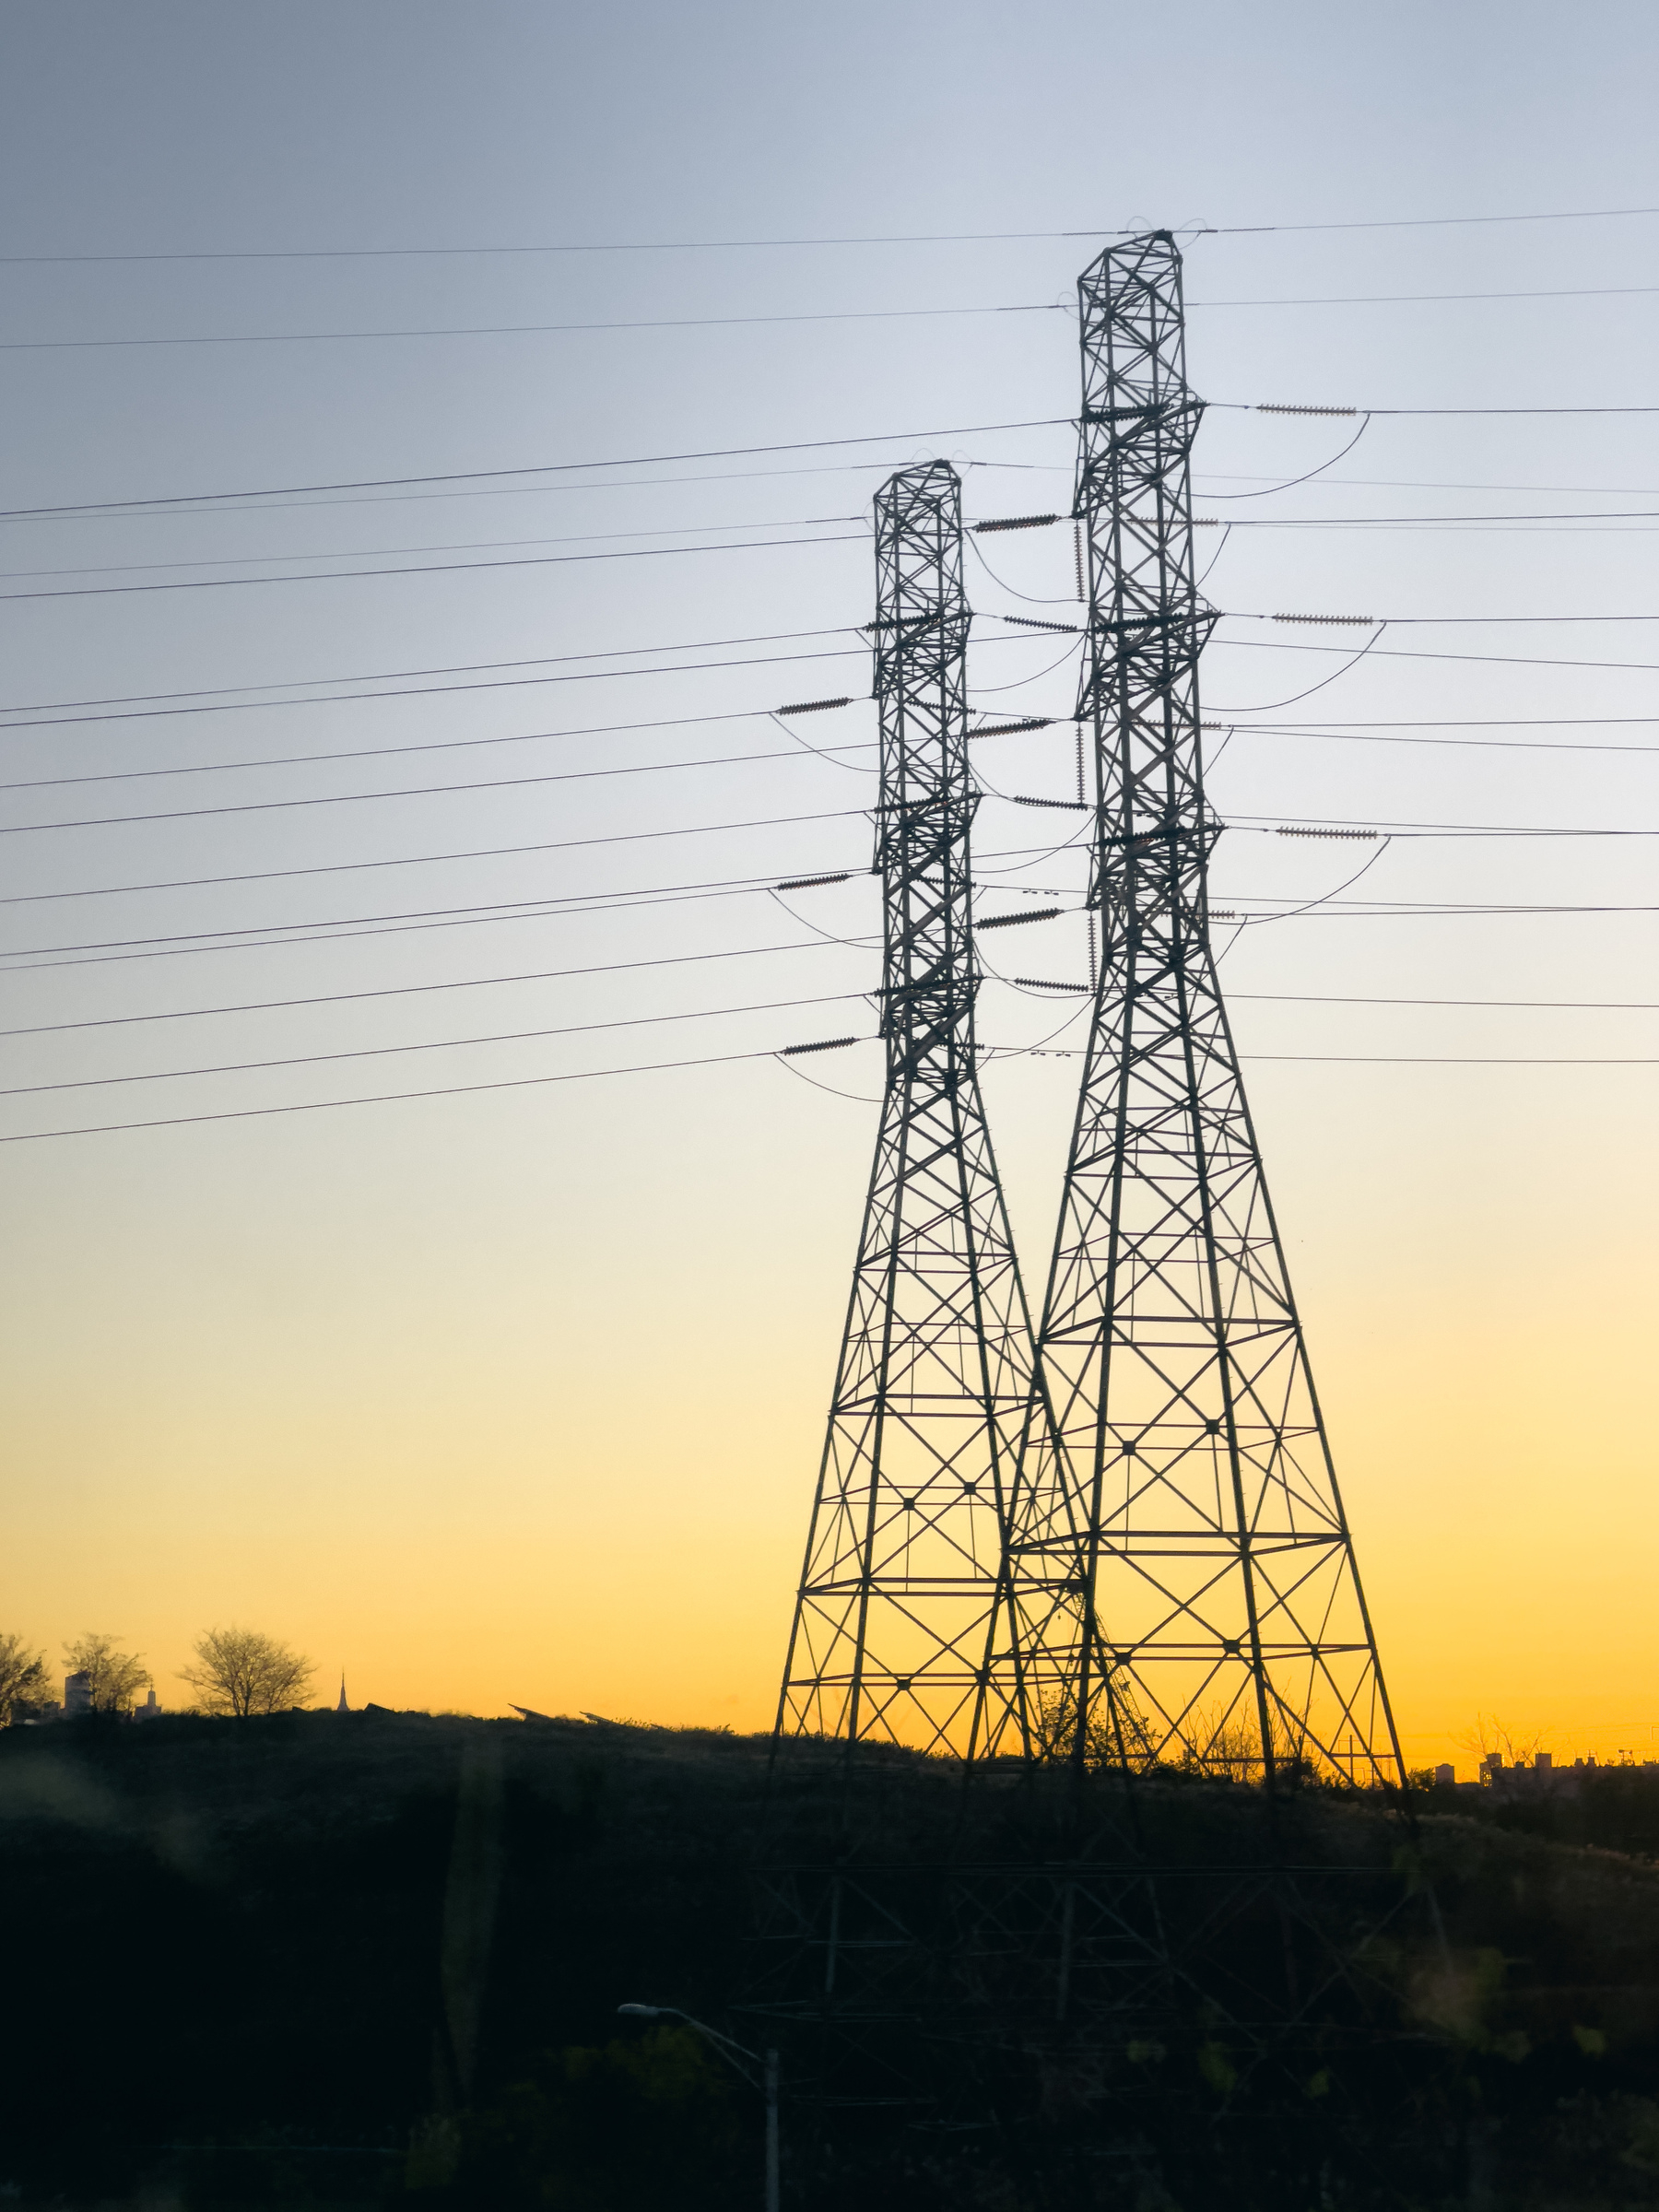 Transmission towers and wires at sunrise.